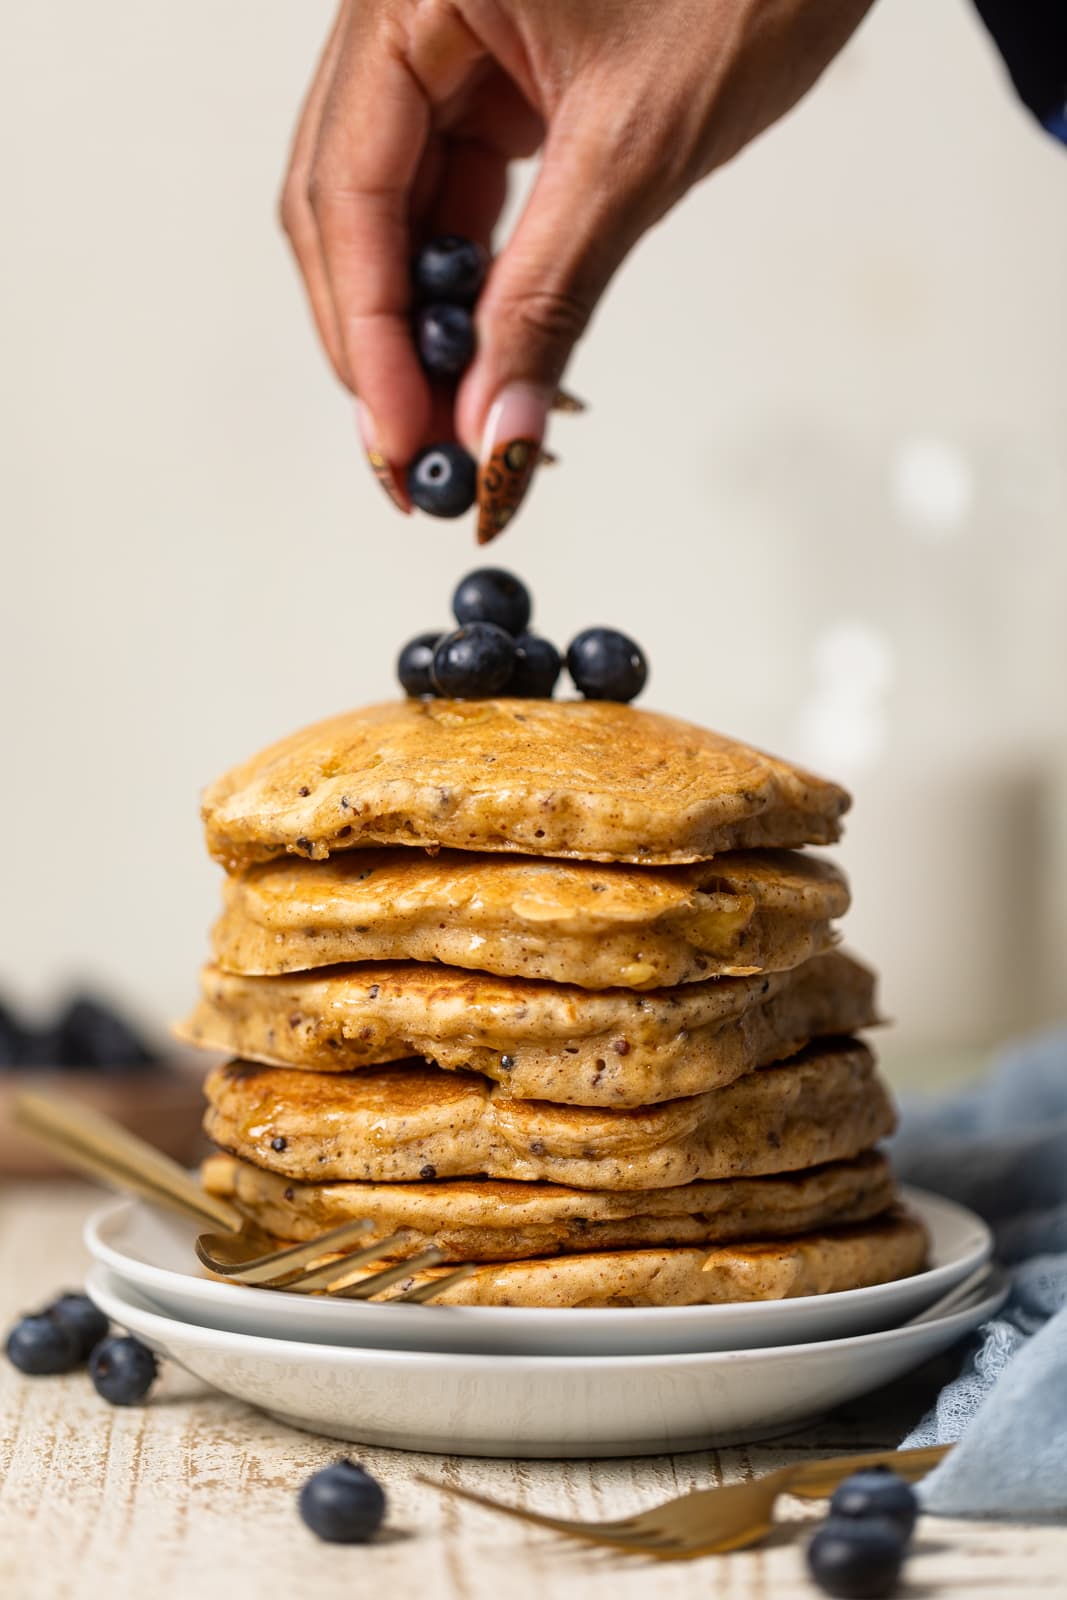 Hand adding blueberries on top of a stack of Fluffy Protein Pancakes